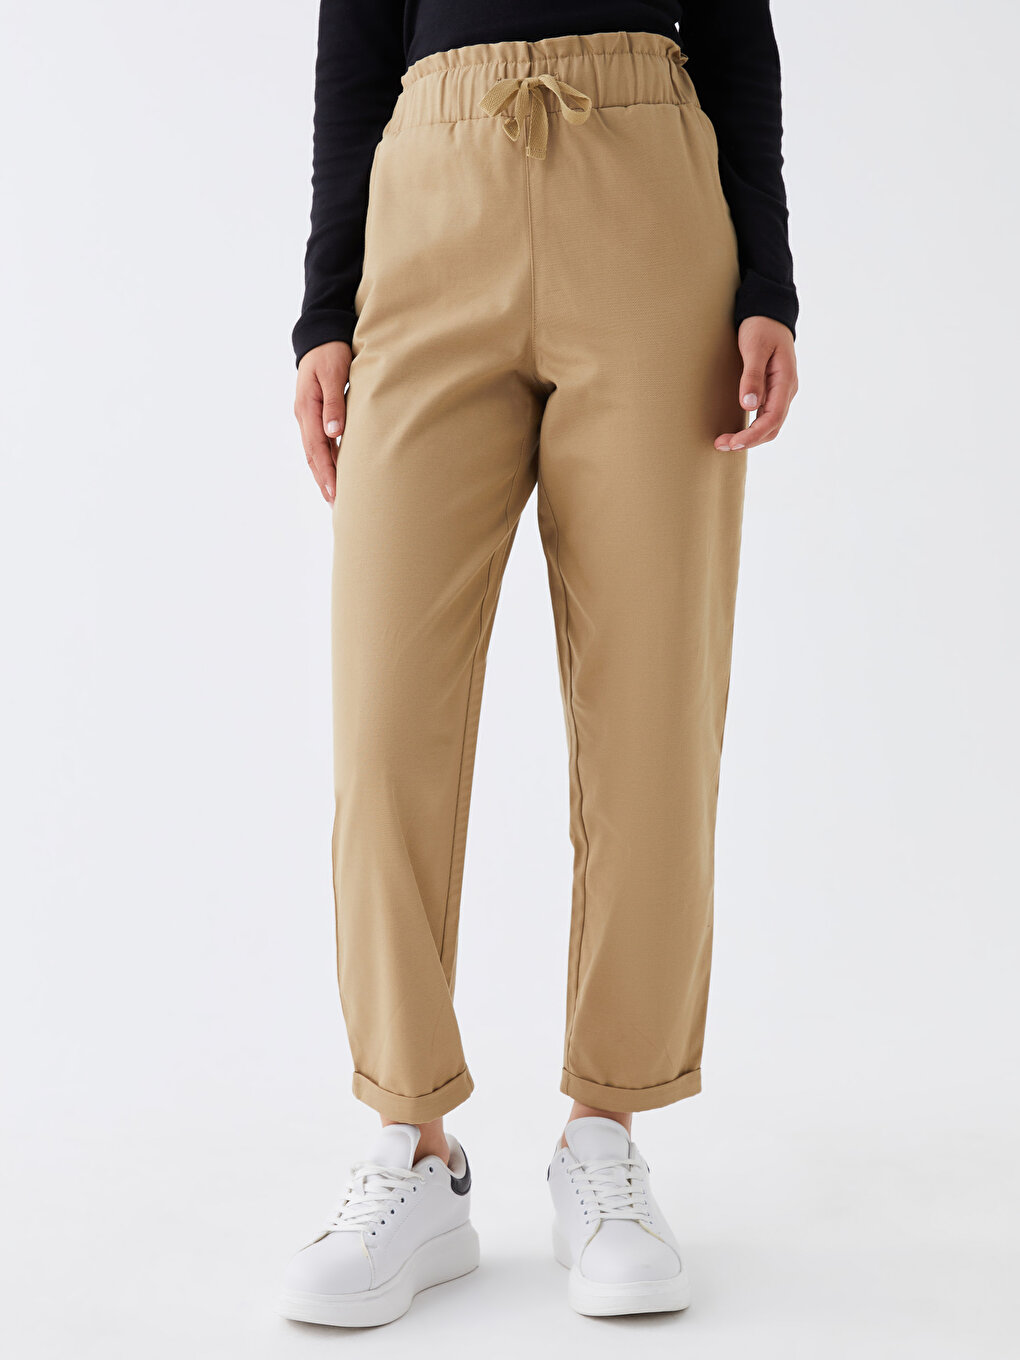 WOMEN'S COTTON RELAX ANKLE PANTS